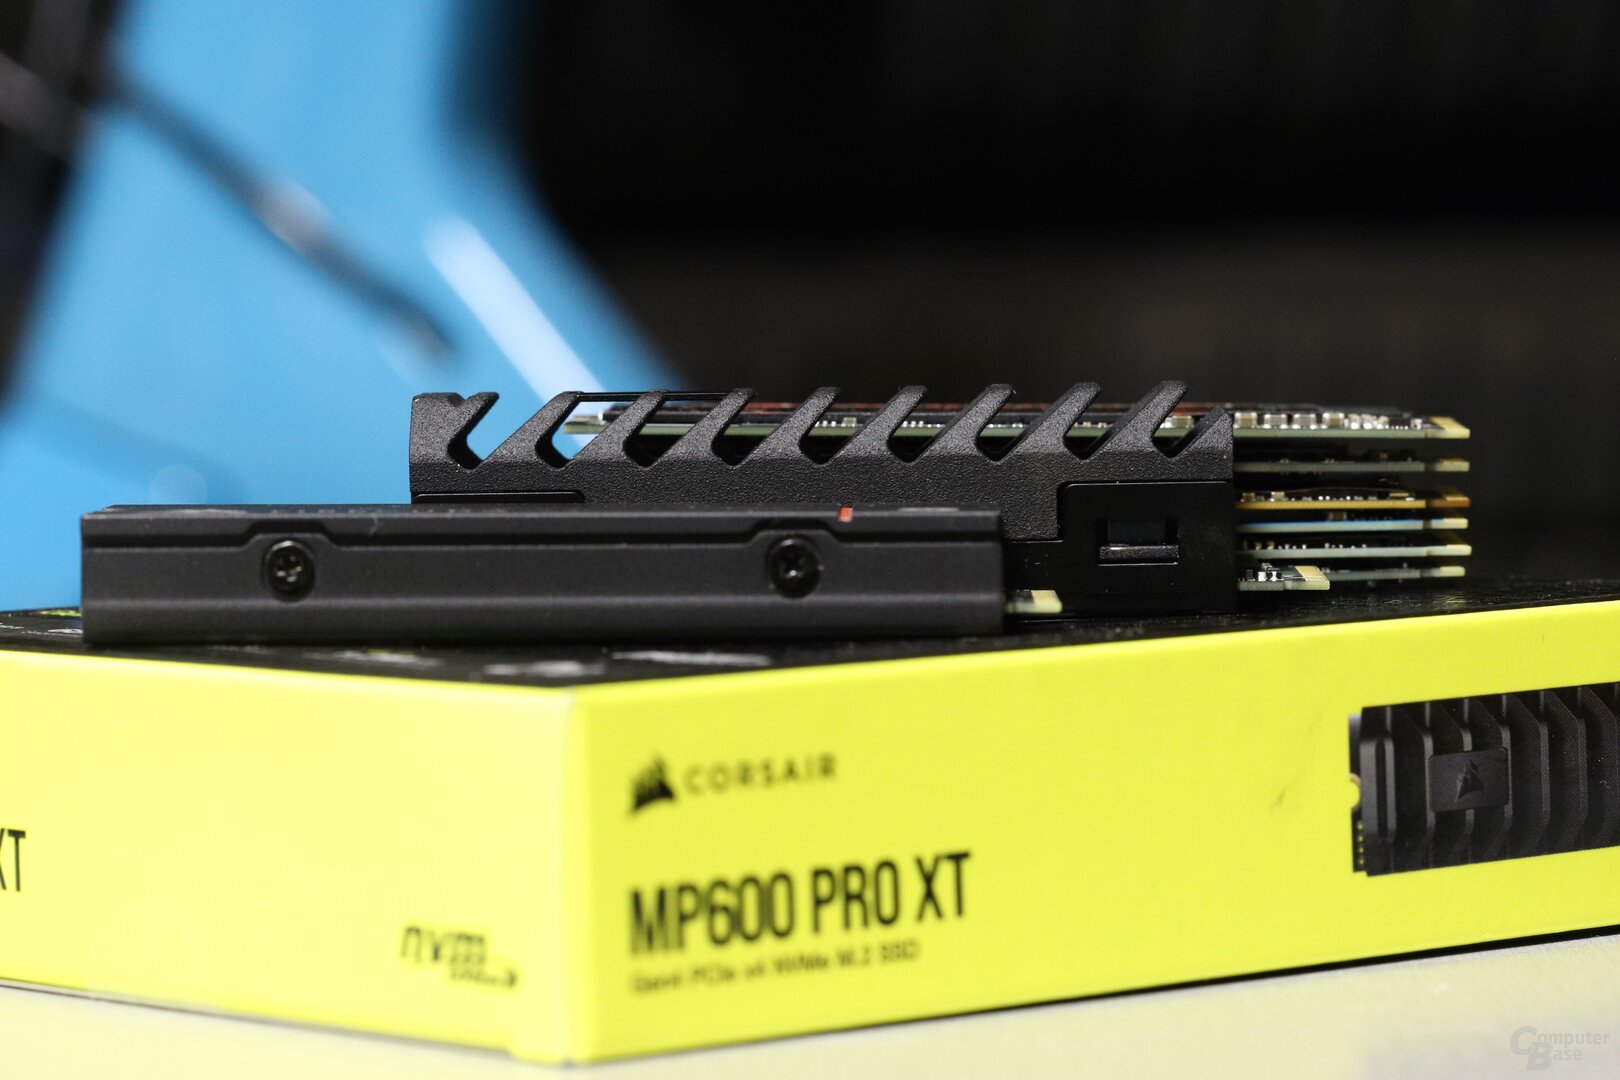 Corsair MP600 Pro XT - Coolest towers on FireCuda 530 (Front) and even Coolerless NVMe Six SSD Stack